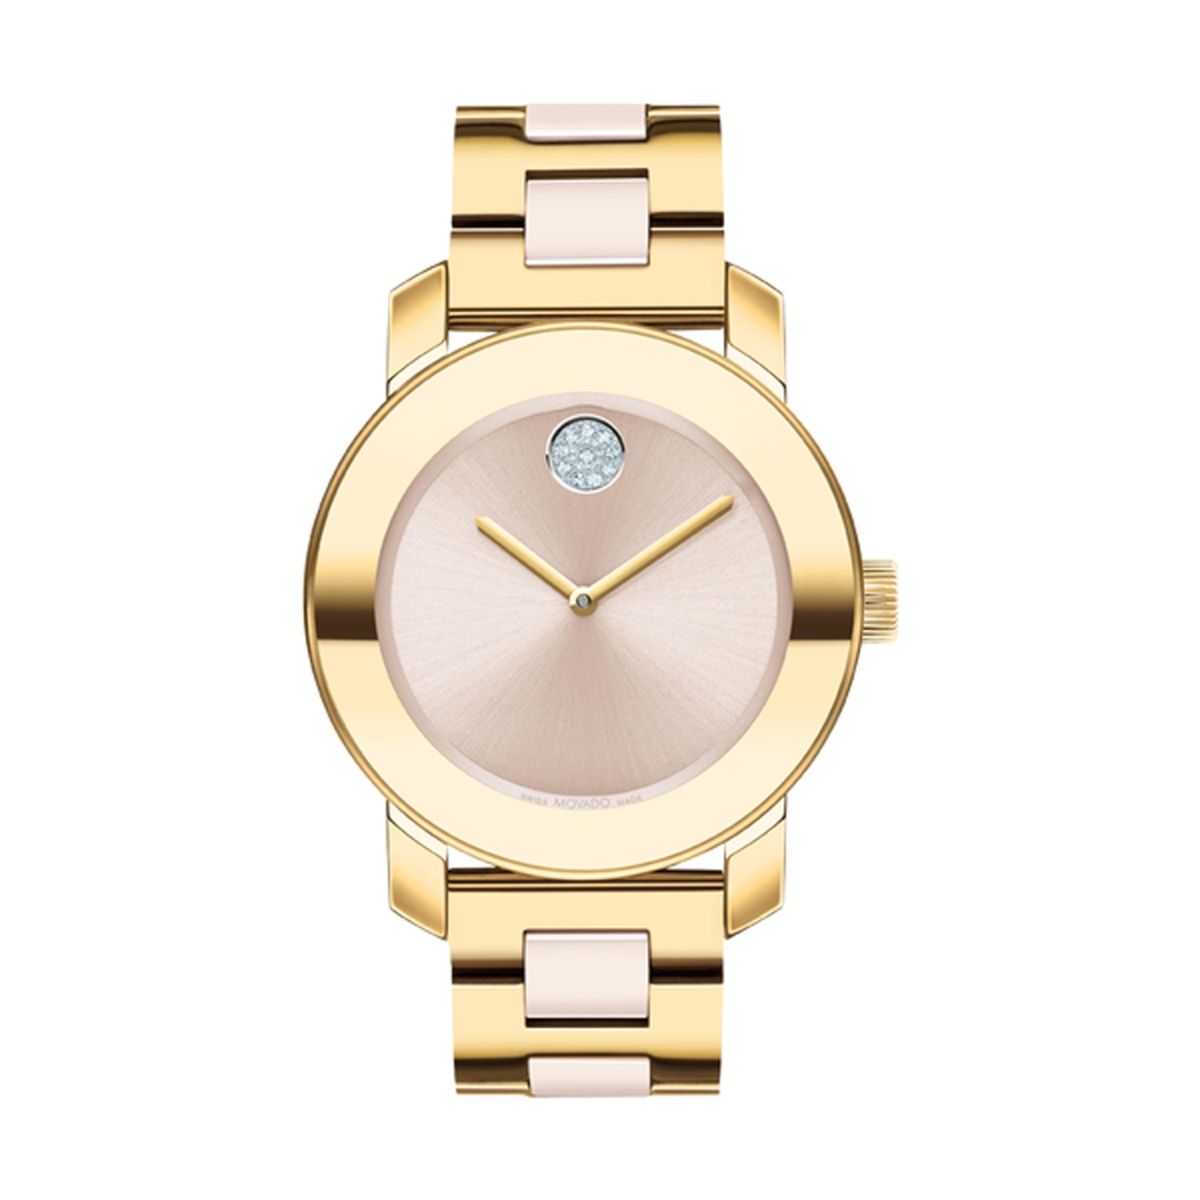 Shop Movado Watches & Collections - Rogers & Hollands